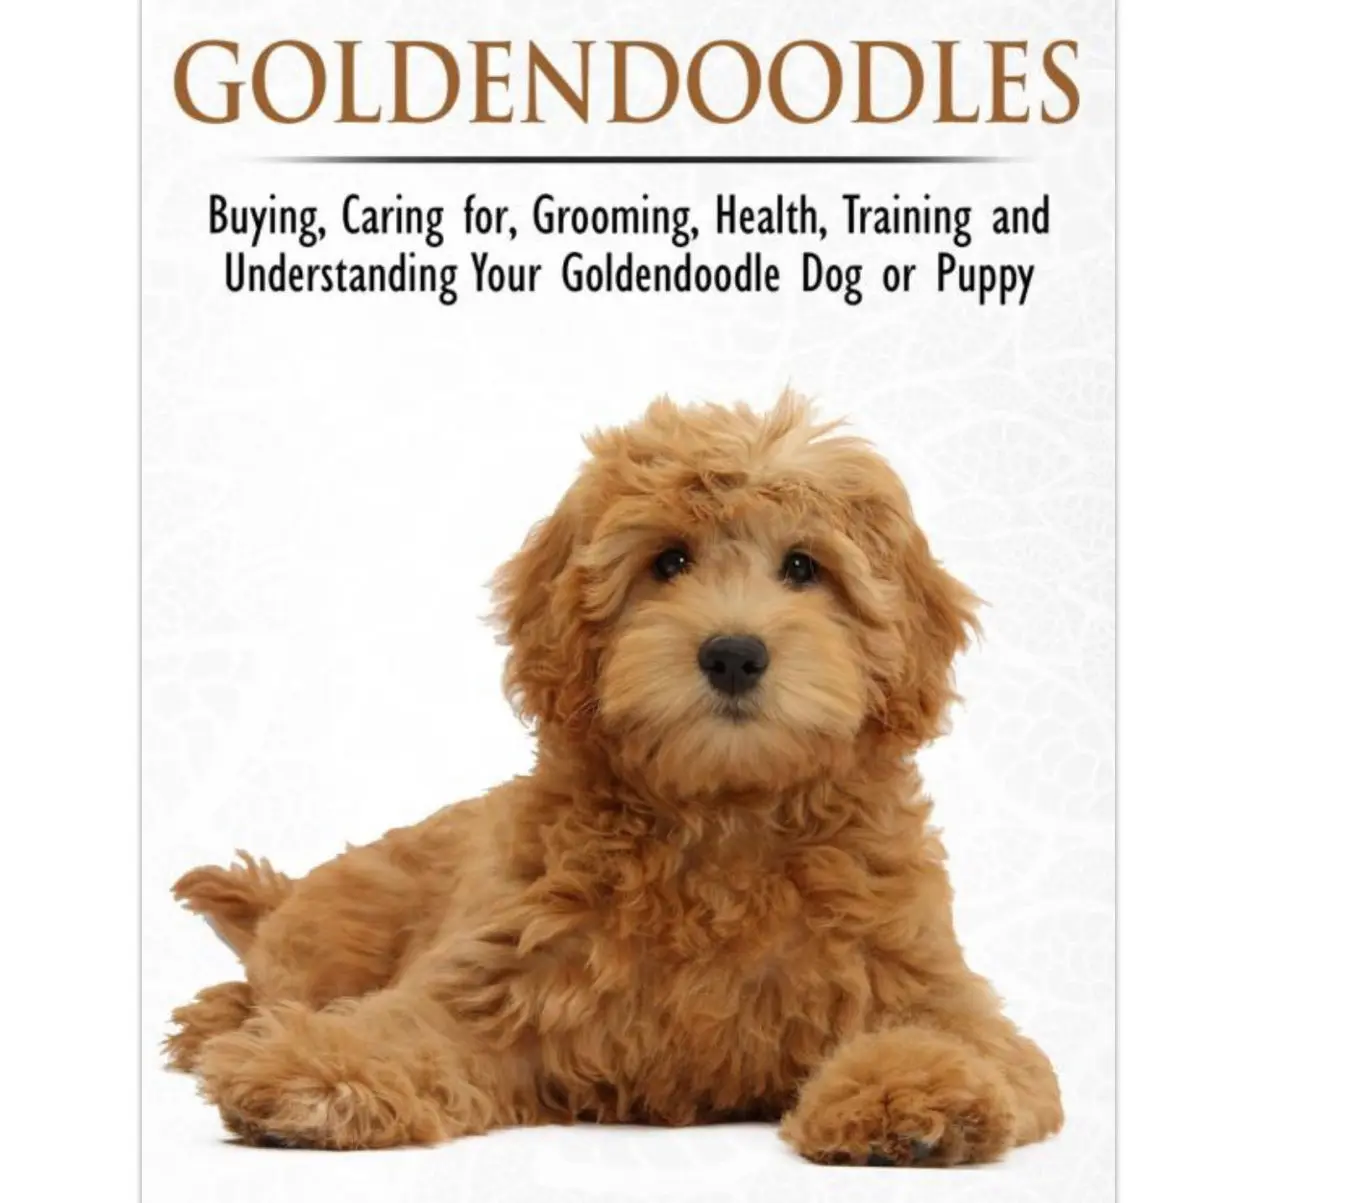 Amazon books about Goldendoodles